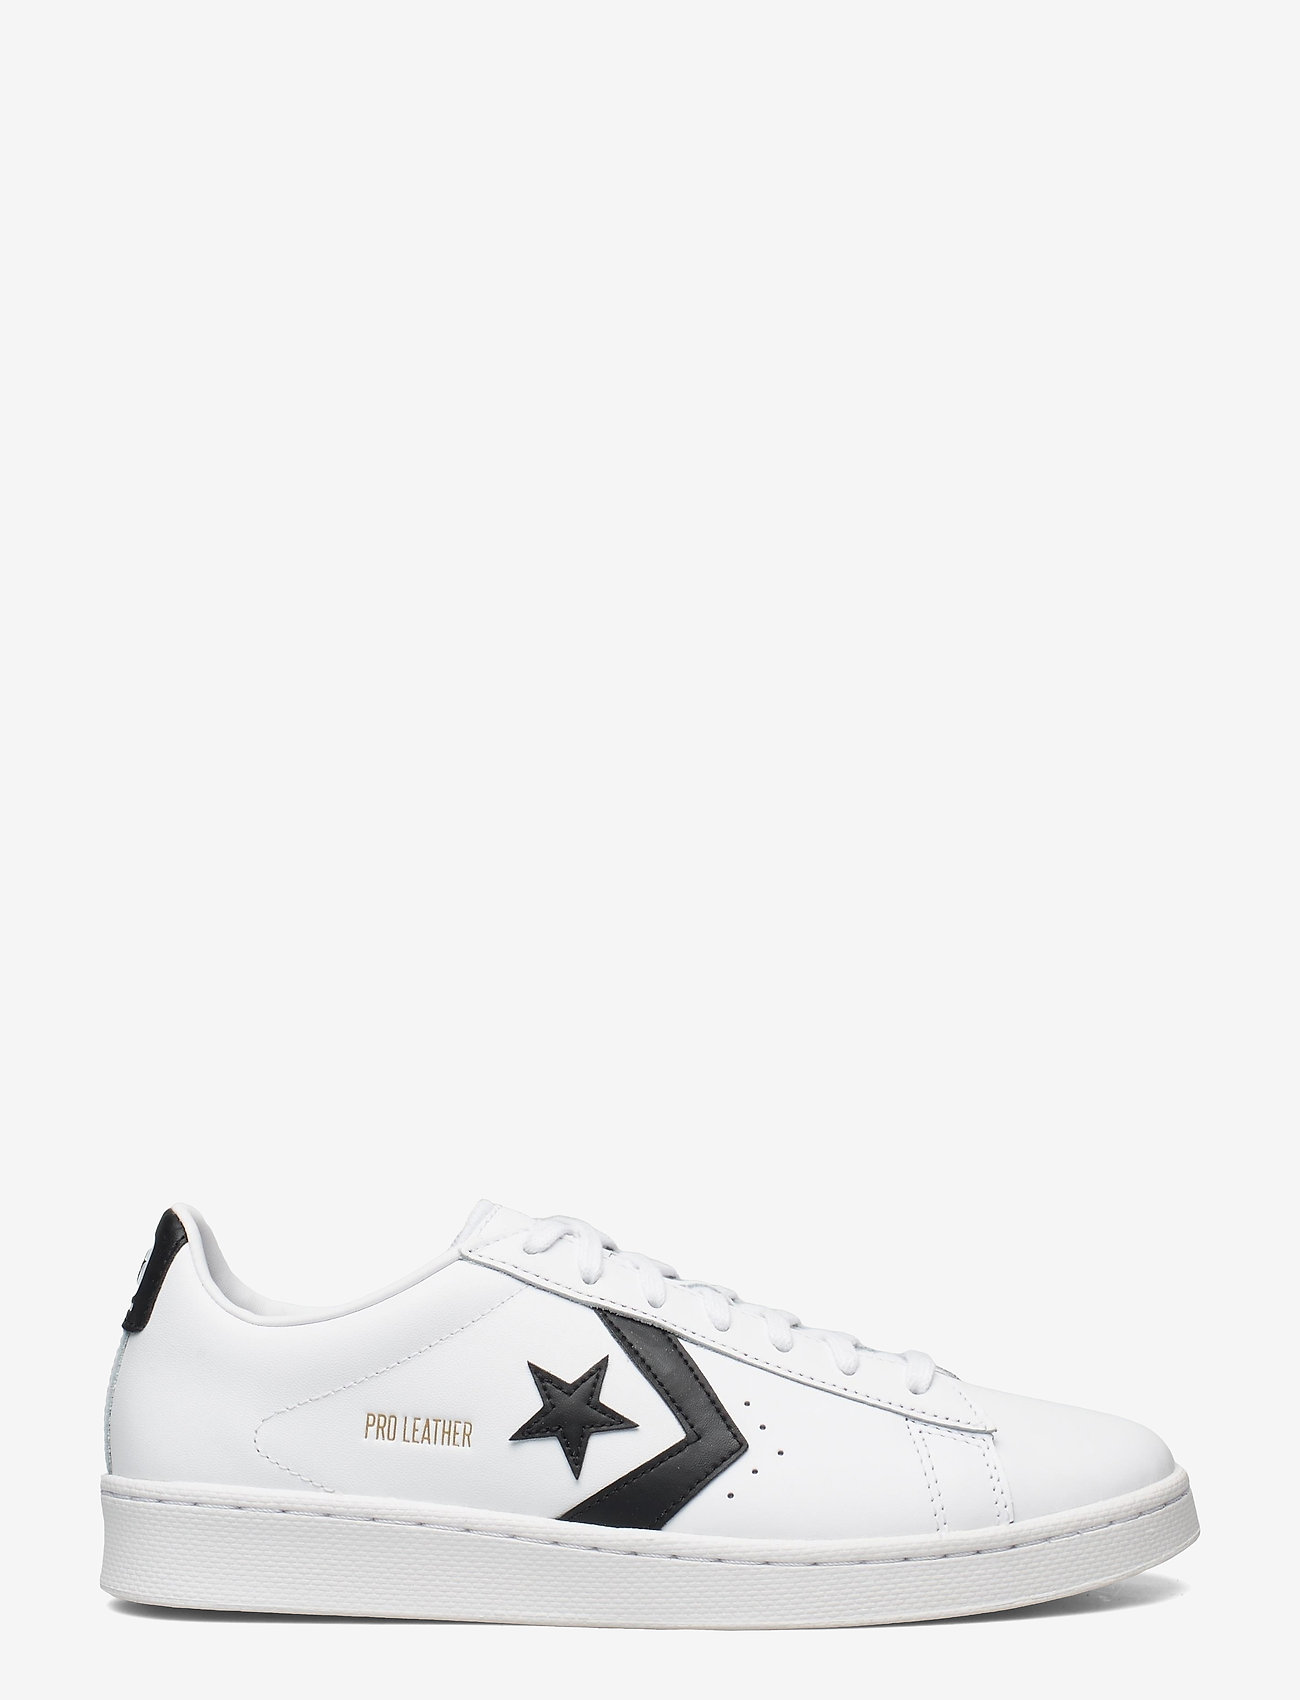 converse leather ox white